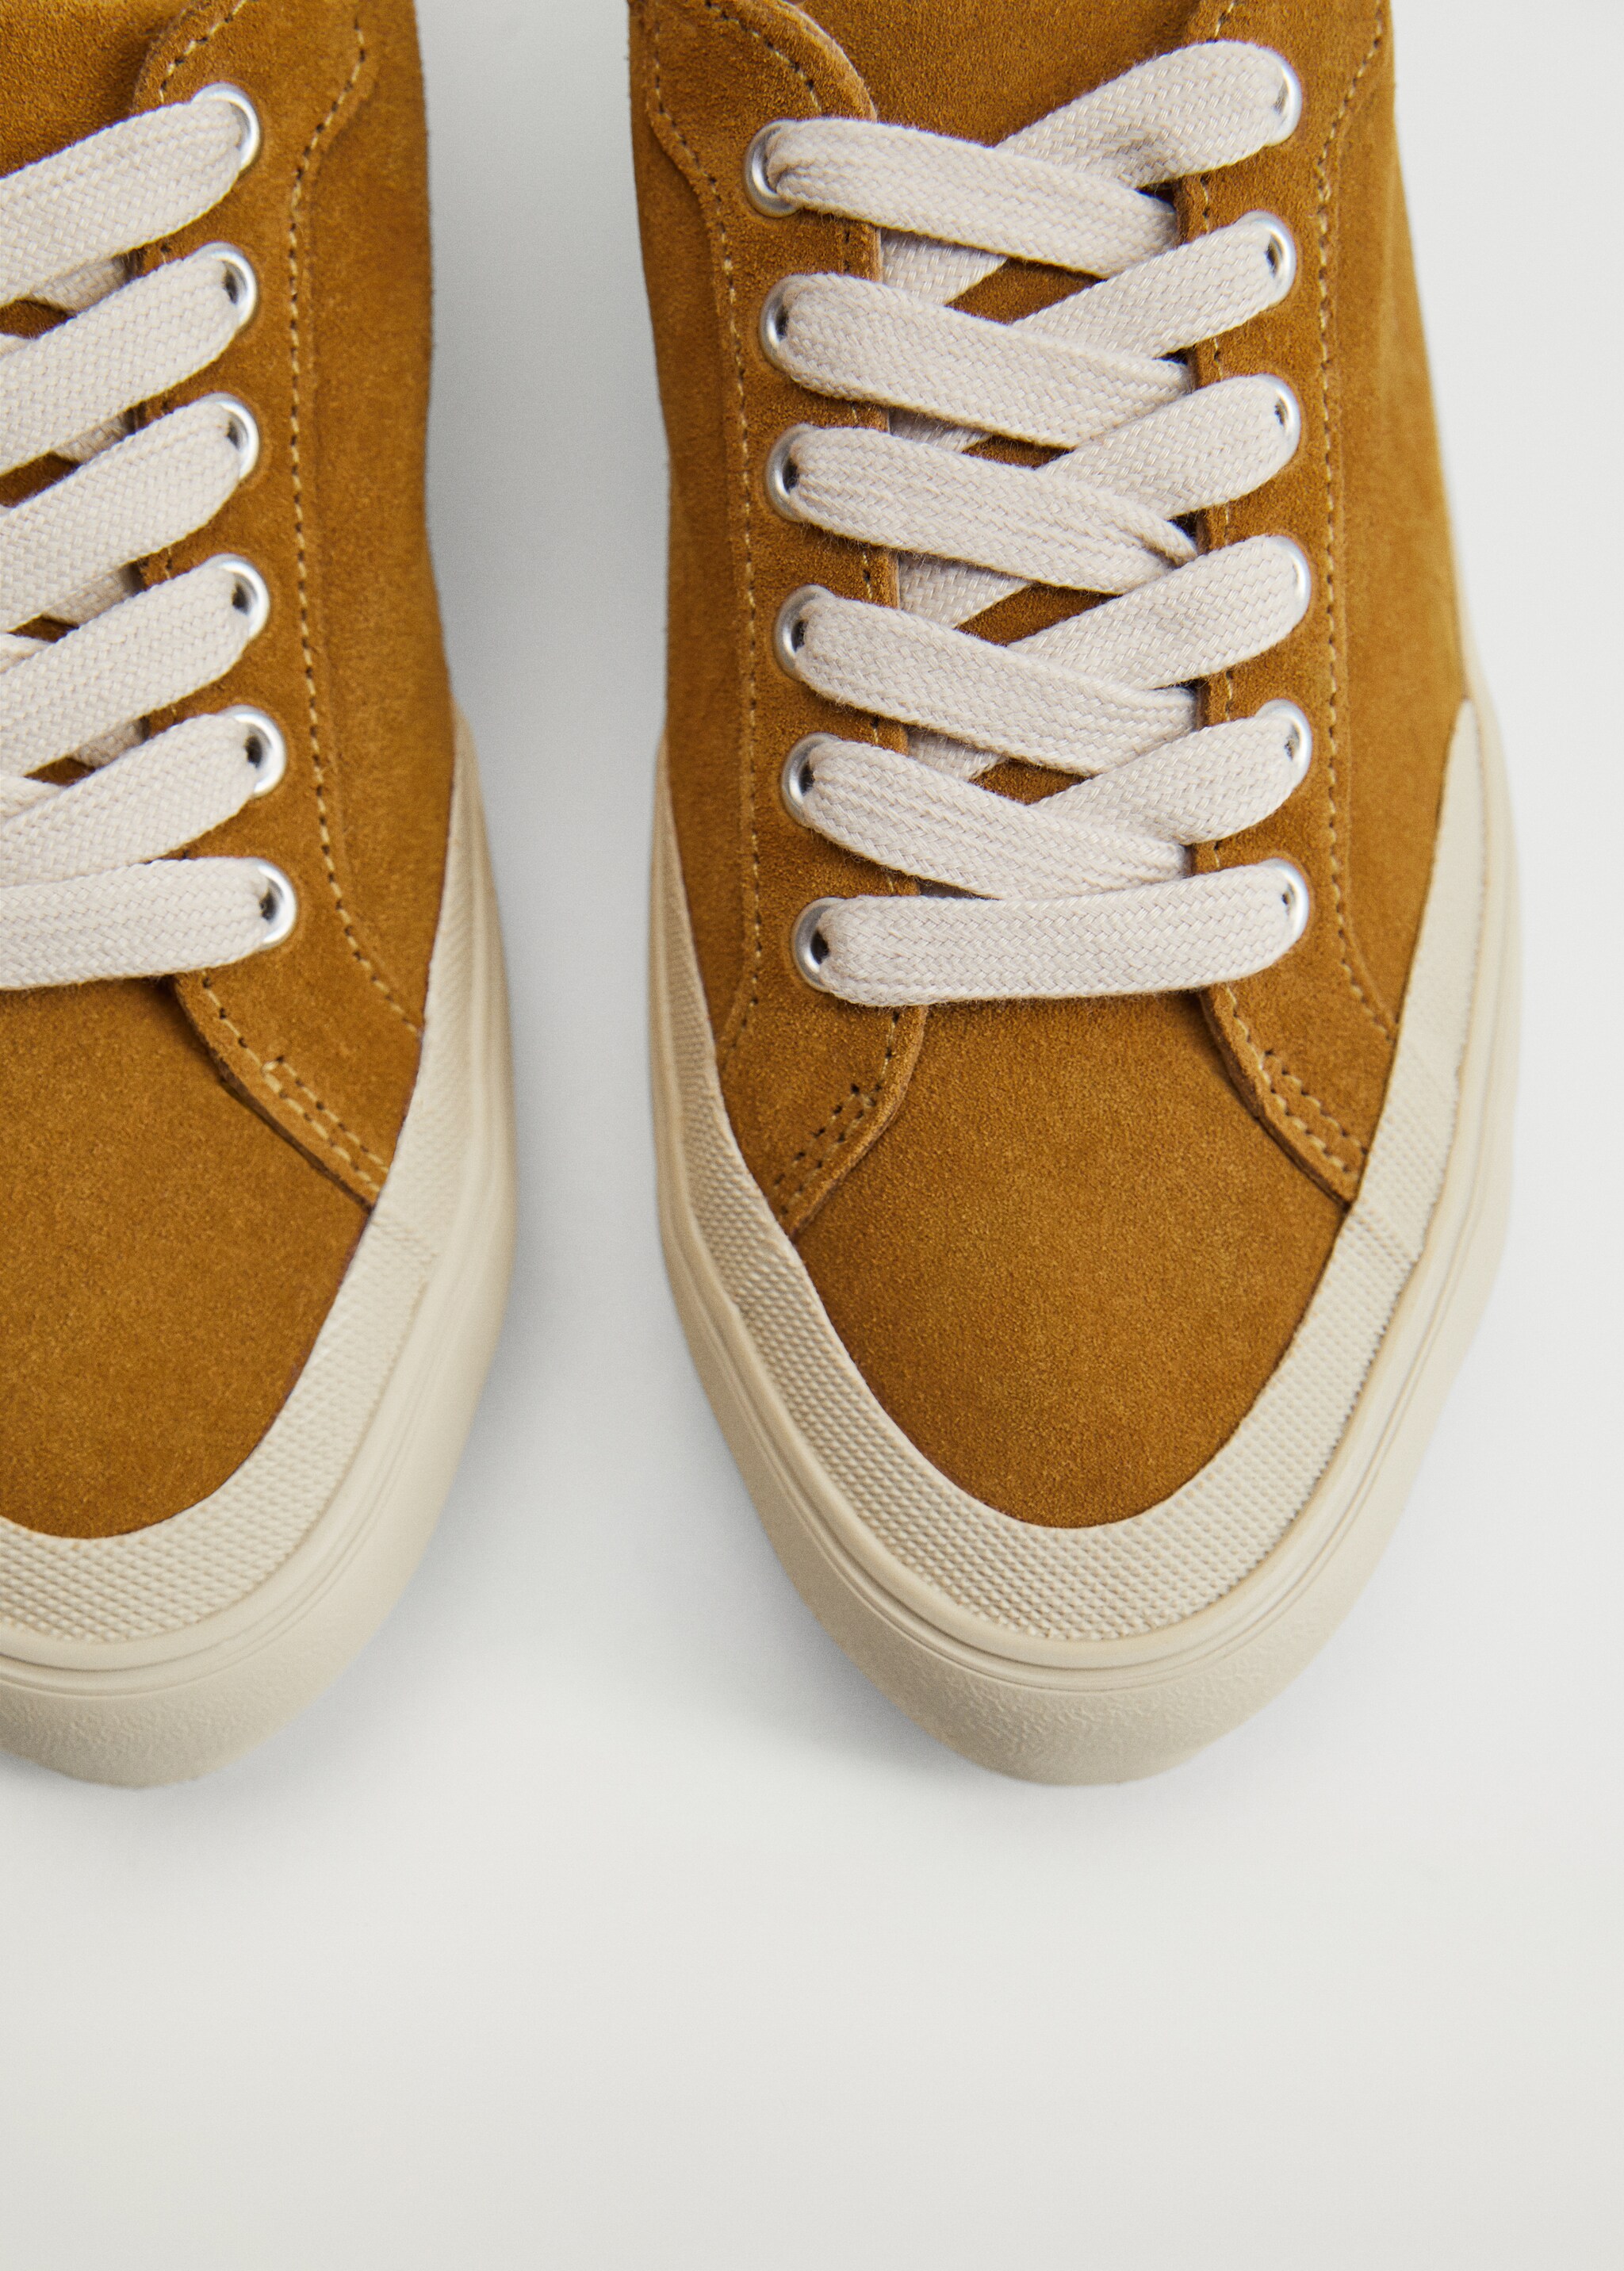 Leather sneakers - Details of the article 3